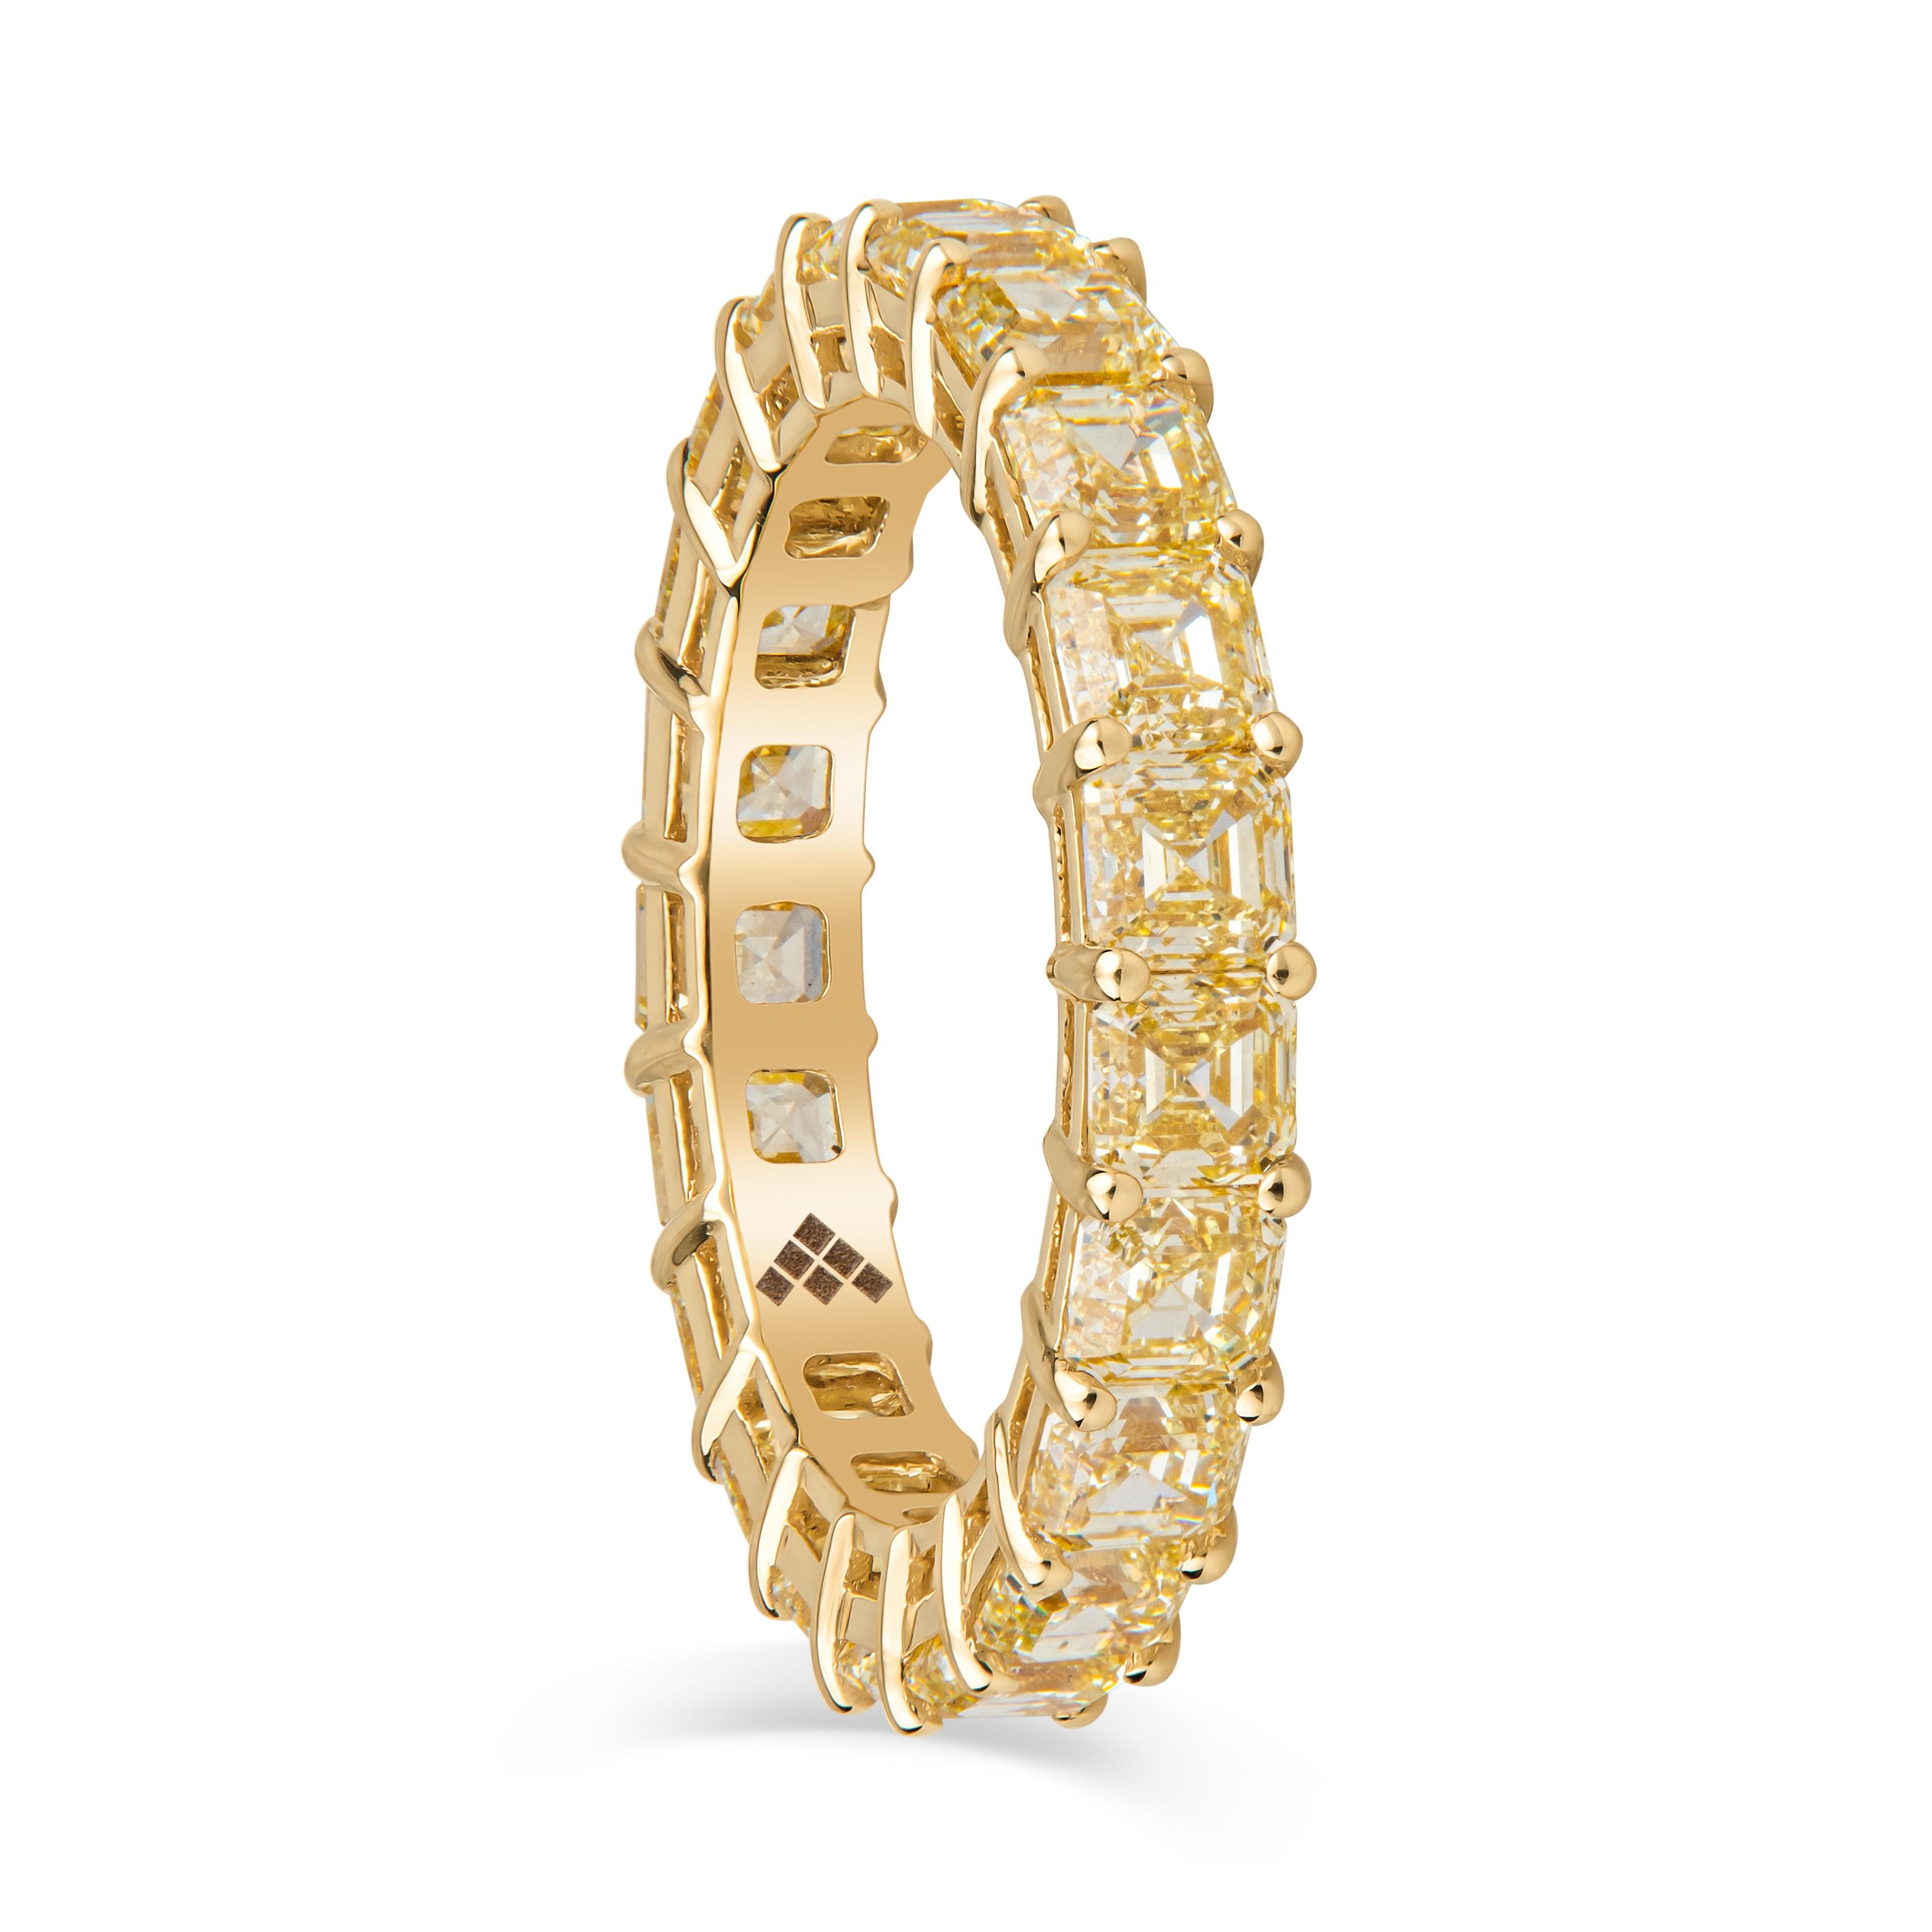 This stunning eternity band features 4.39ct total weight in 21 Asscher cut Fancy Yellow diamonds, set in an 18kt yellow gold, low profile, open basket style band in a size 6. Contact us for resizing options. The diamonds are of fancy yellow color,